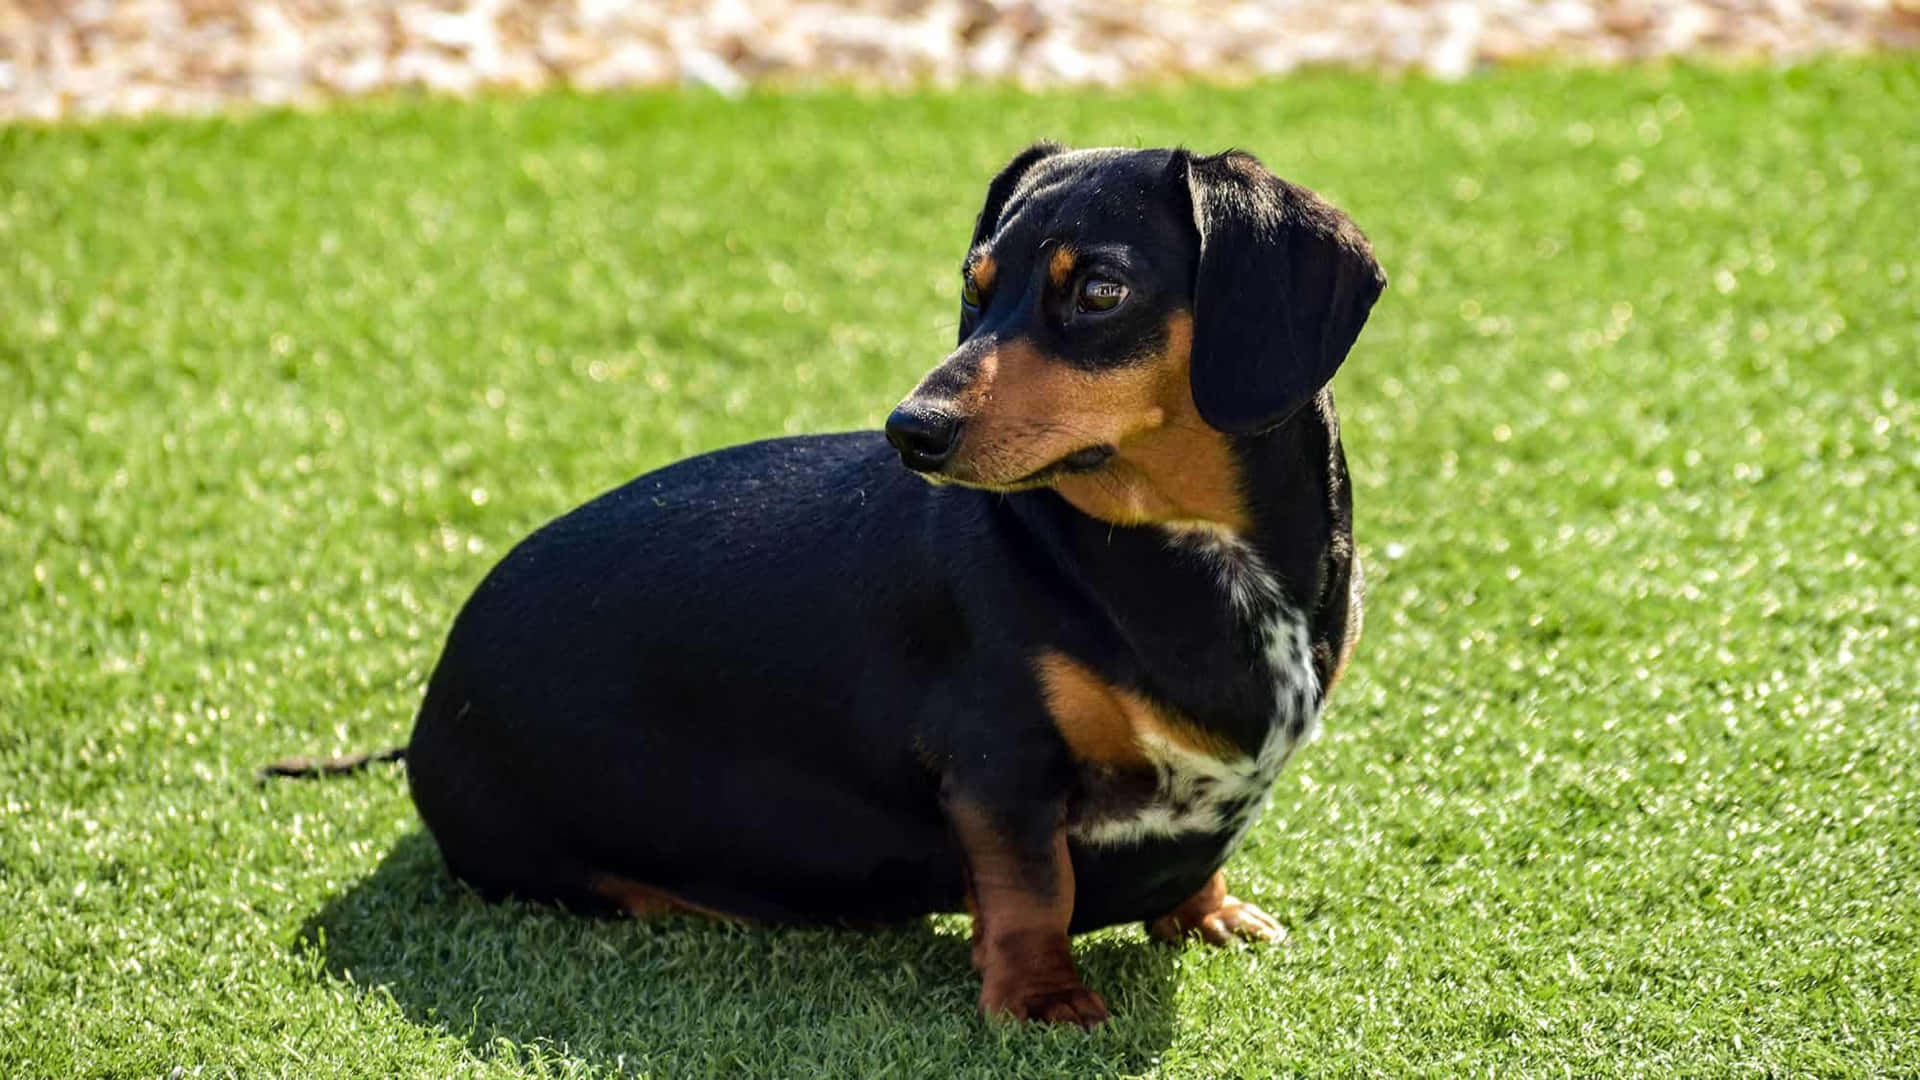 This adorable dachshund puppy is just too cute!